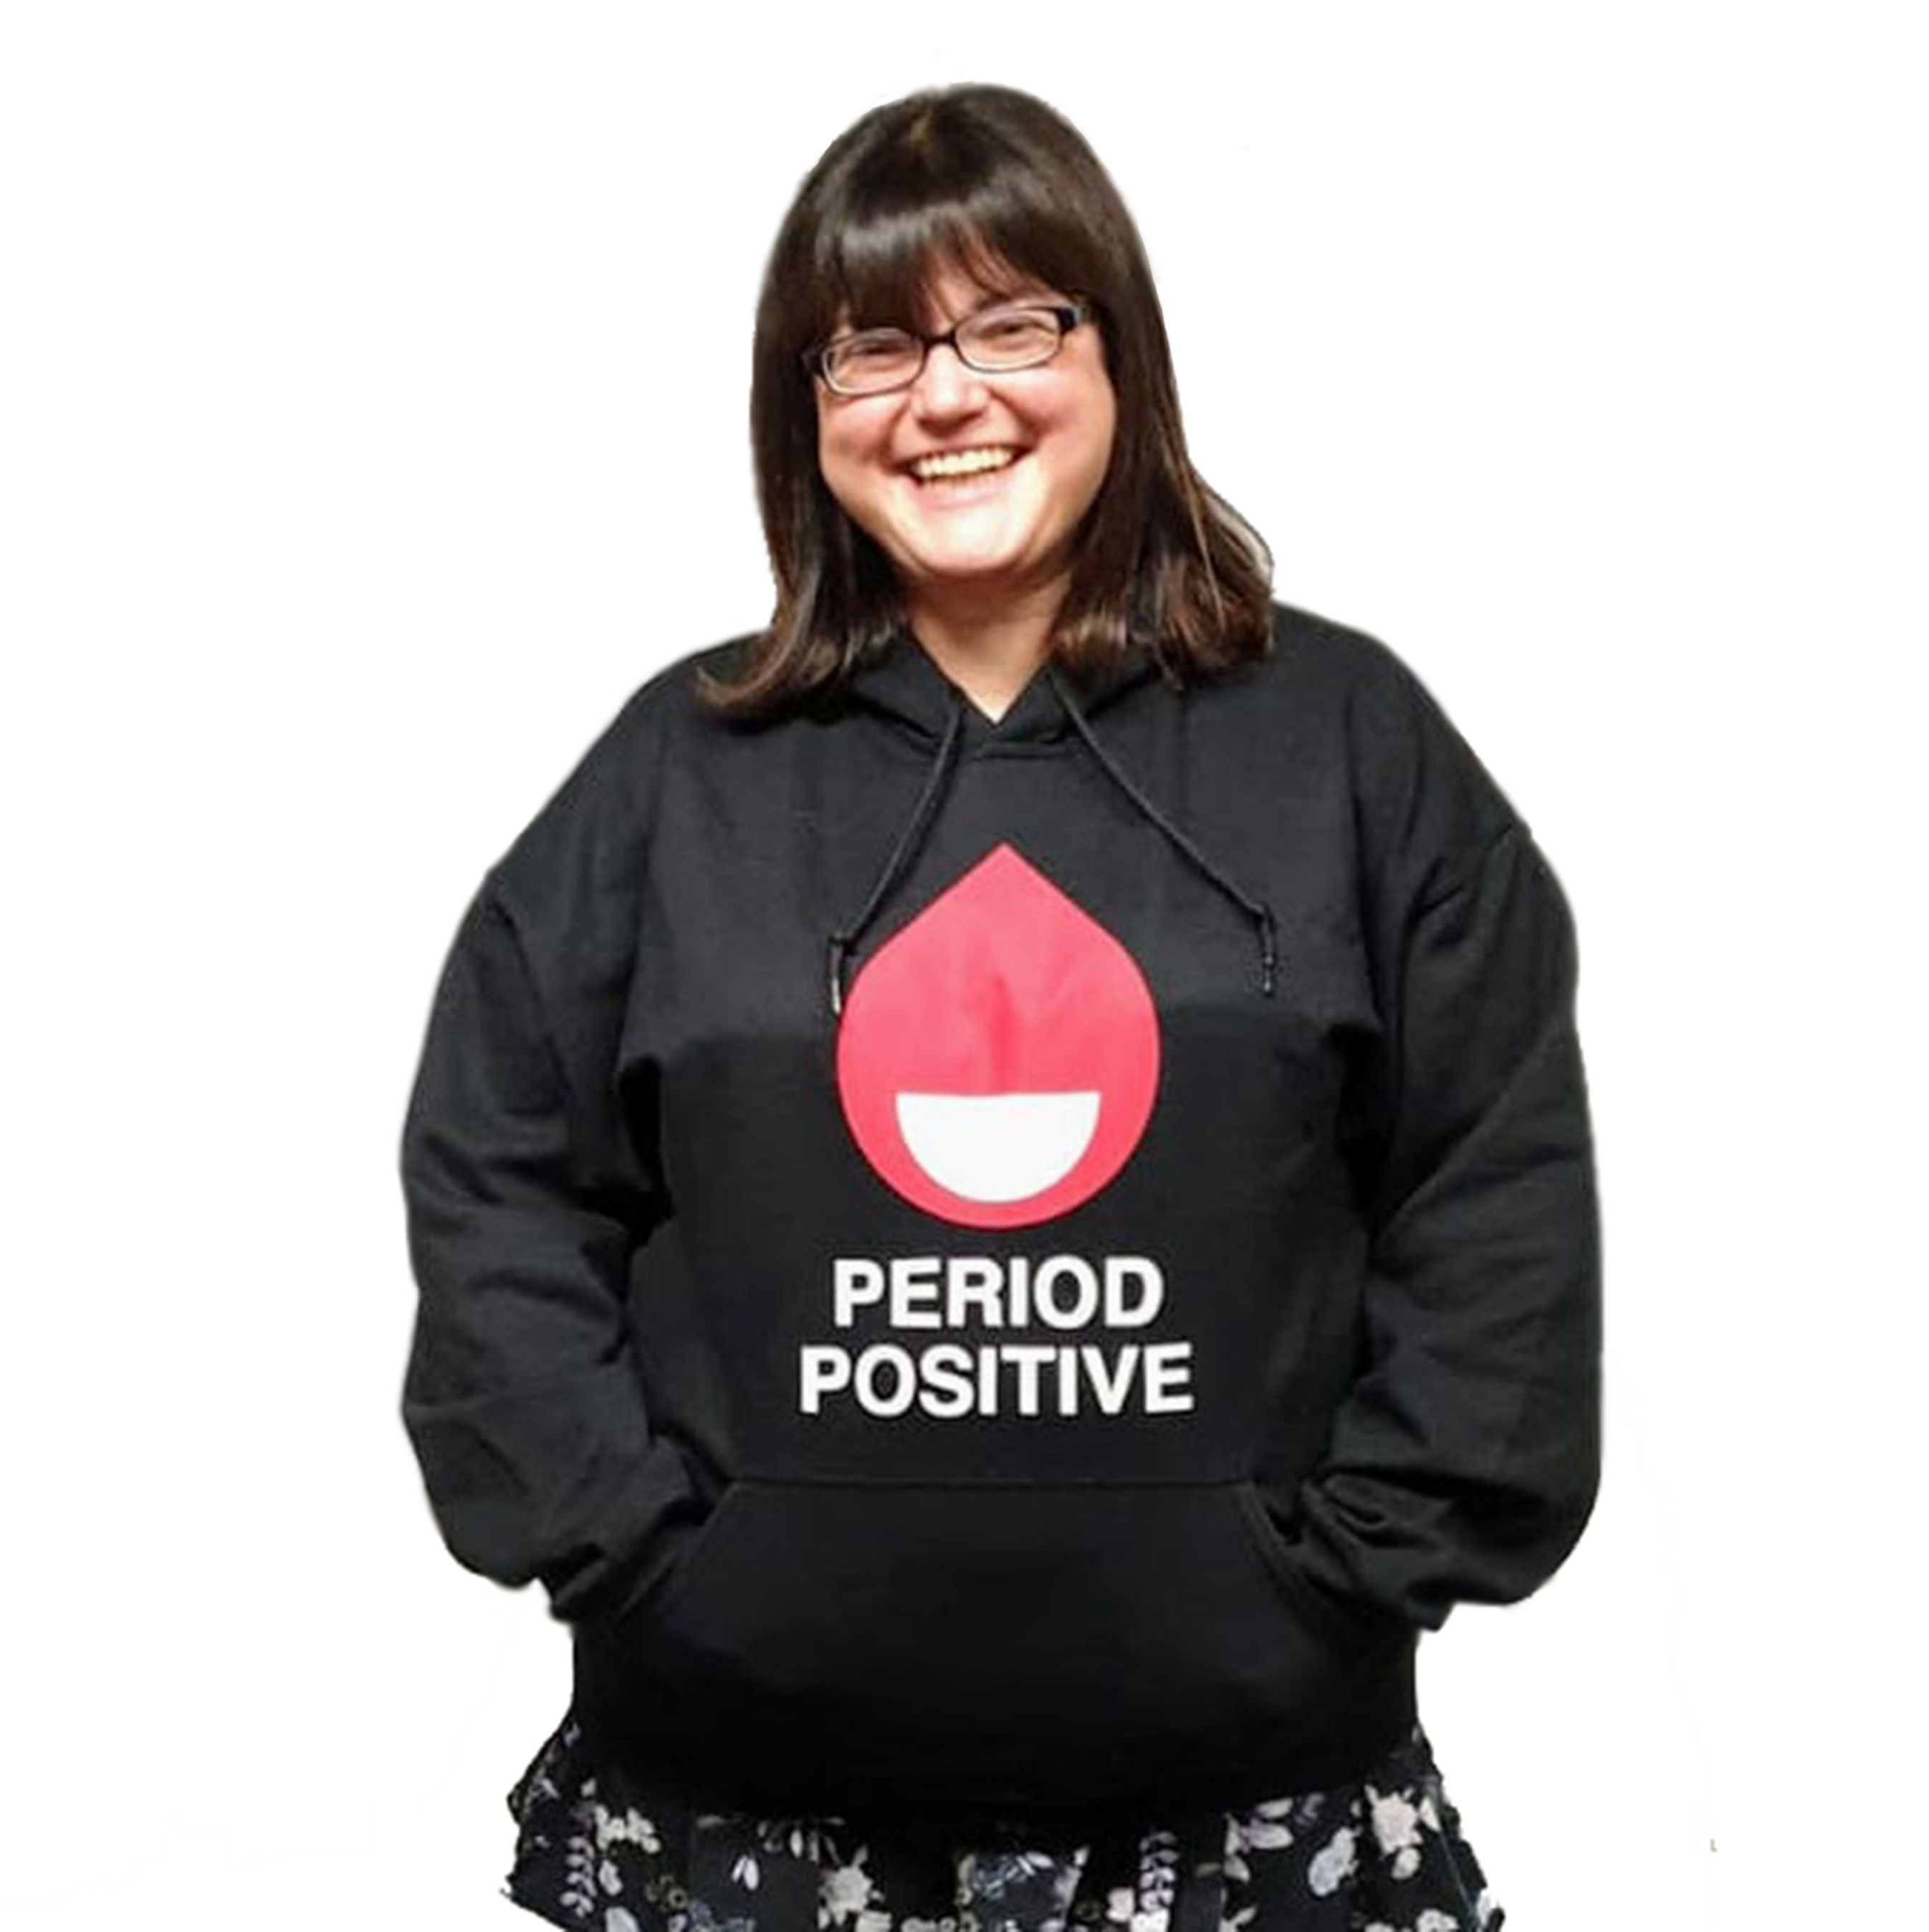 Chella Quint wearing the Period Positive hoodie